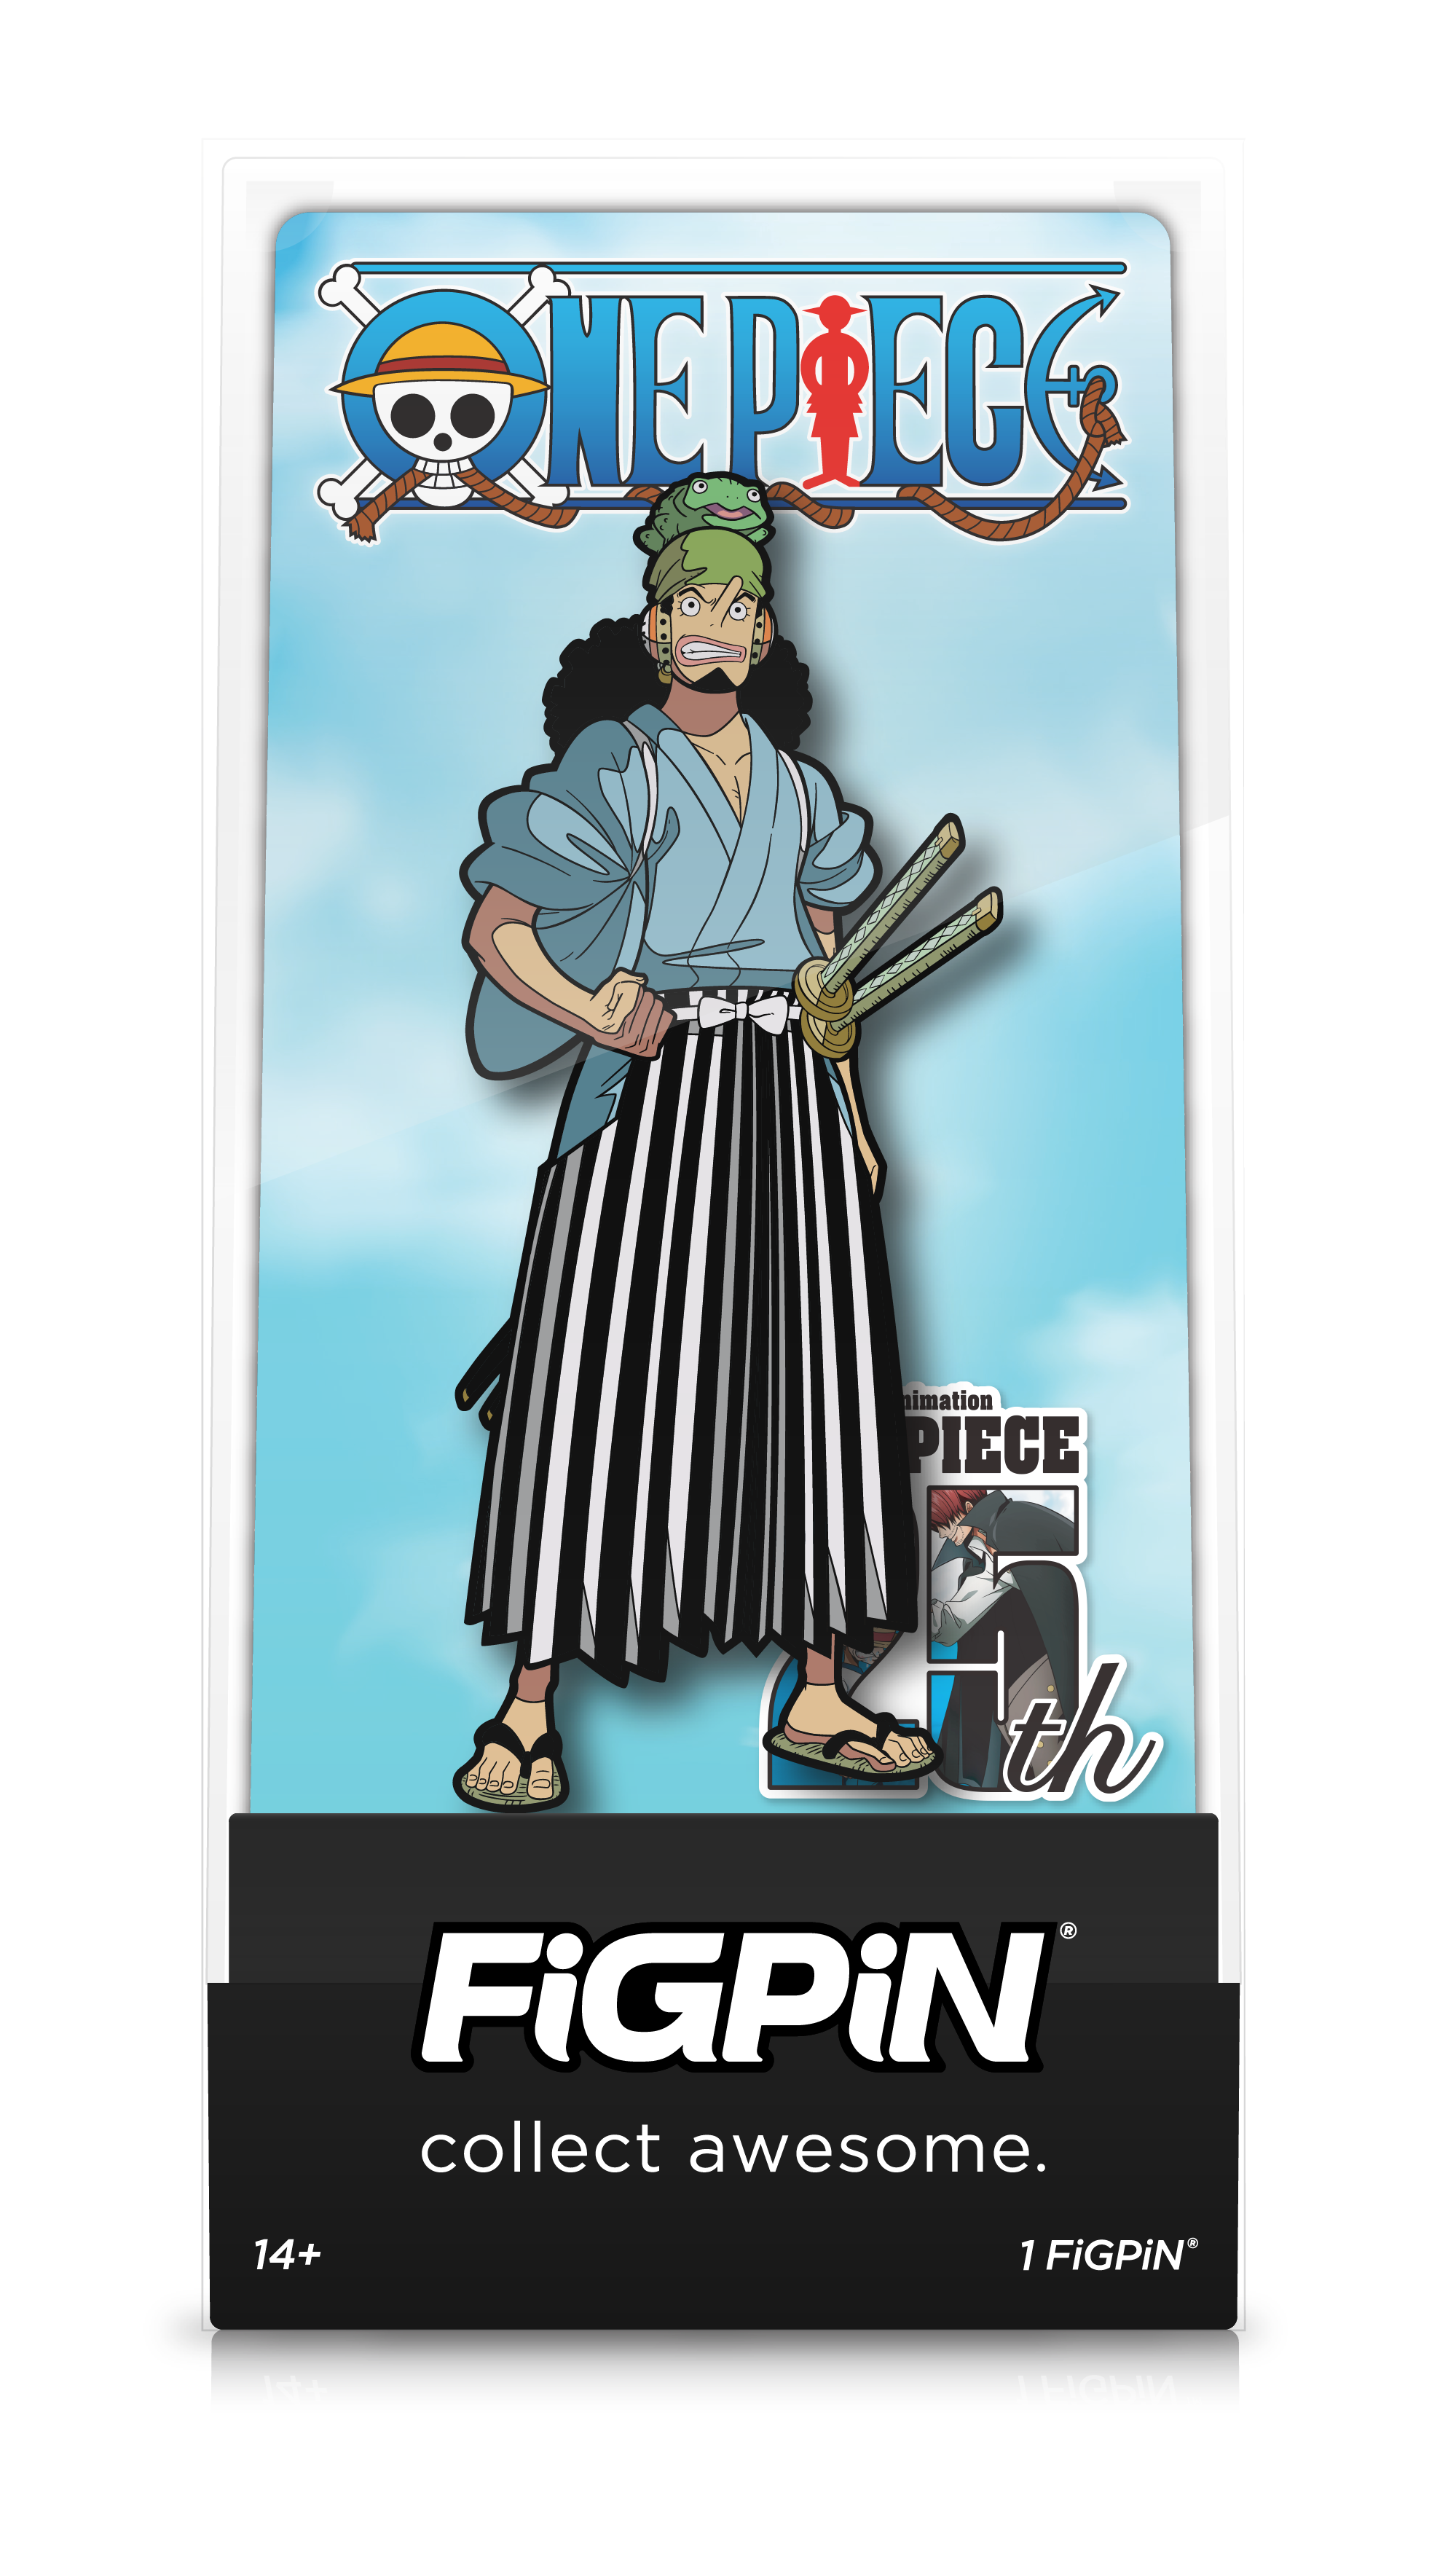 Front view of Usohachi enamel pin inside FiGPiN Display case reading “FiGPiN - collect awesome”